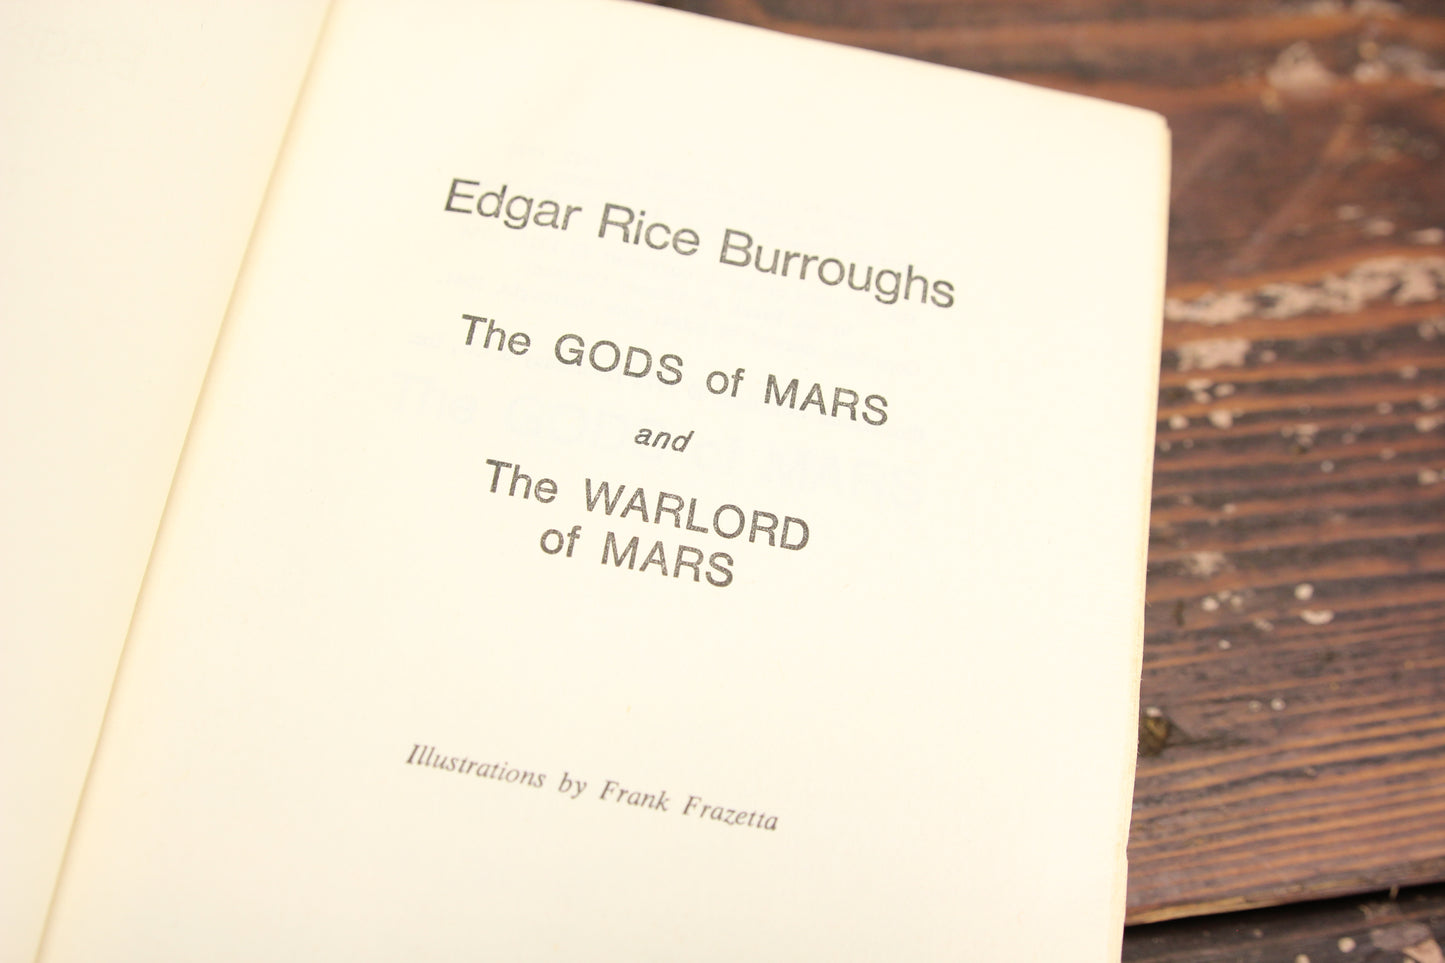 The Gods of Mars & The Warlord of Mars by Edgard Rice Burroughs, Copyright 1971